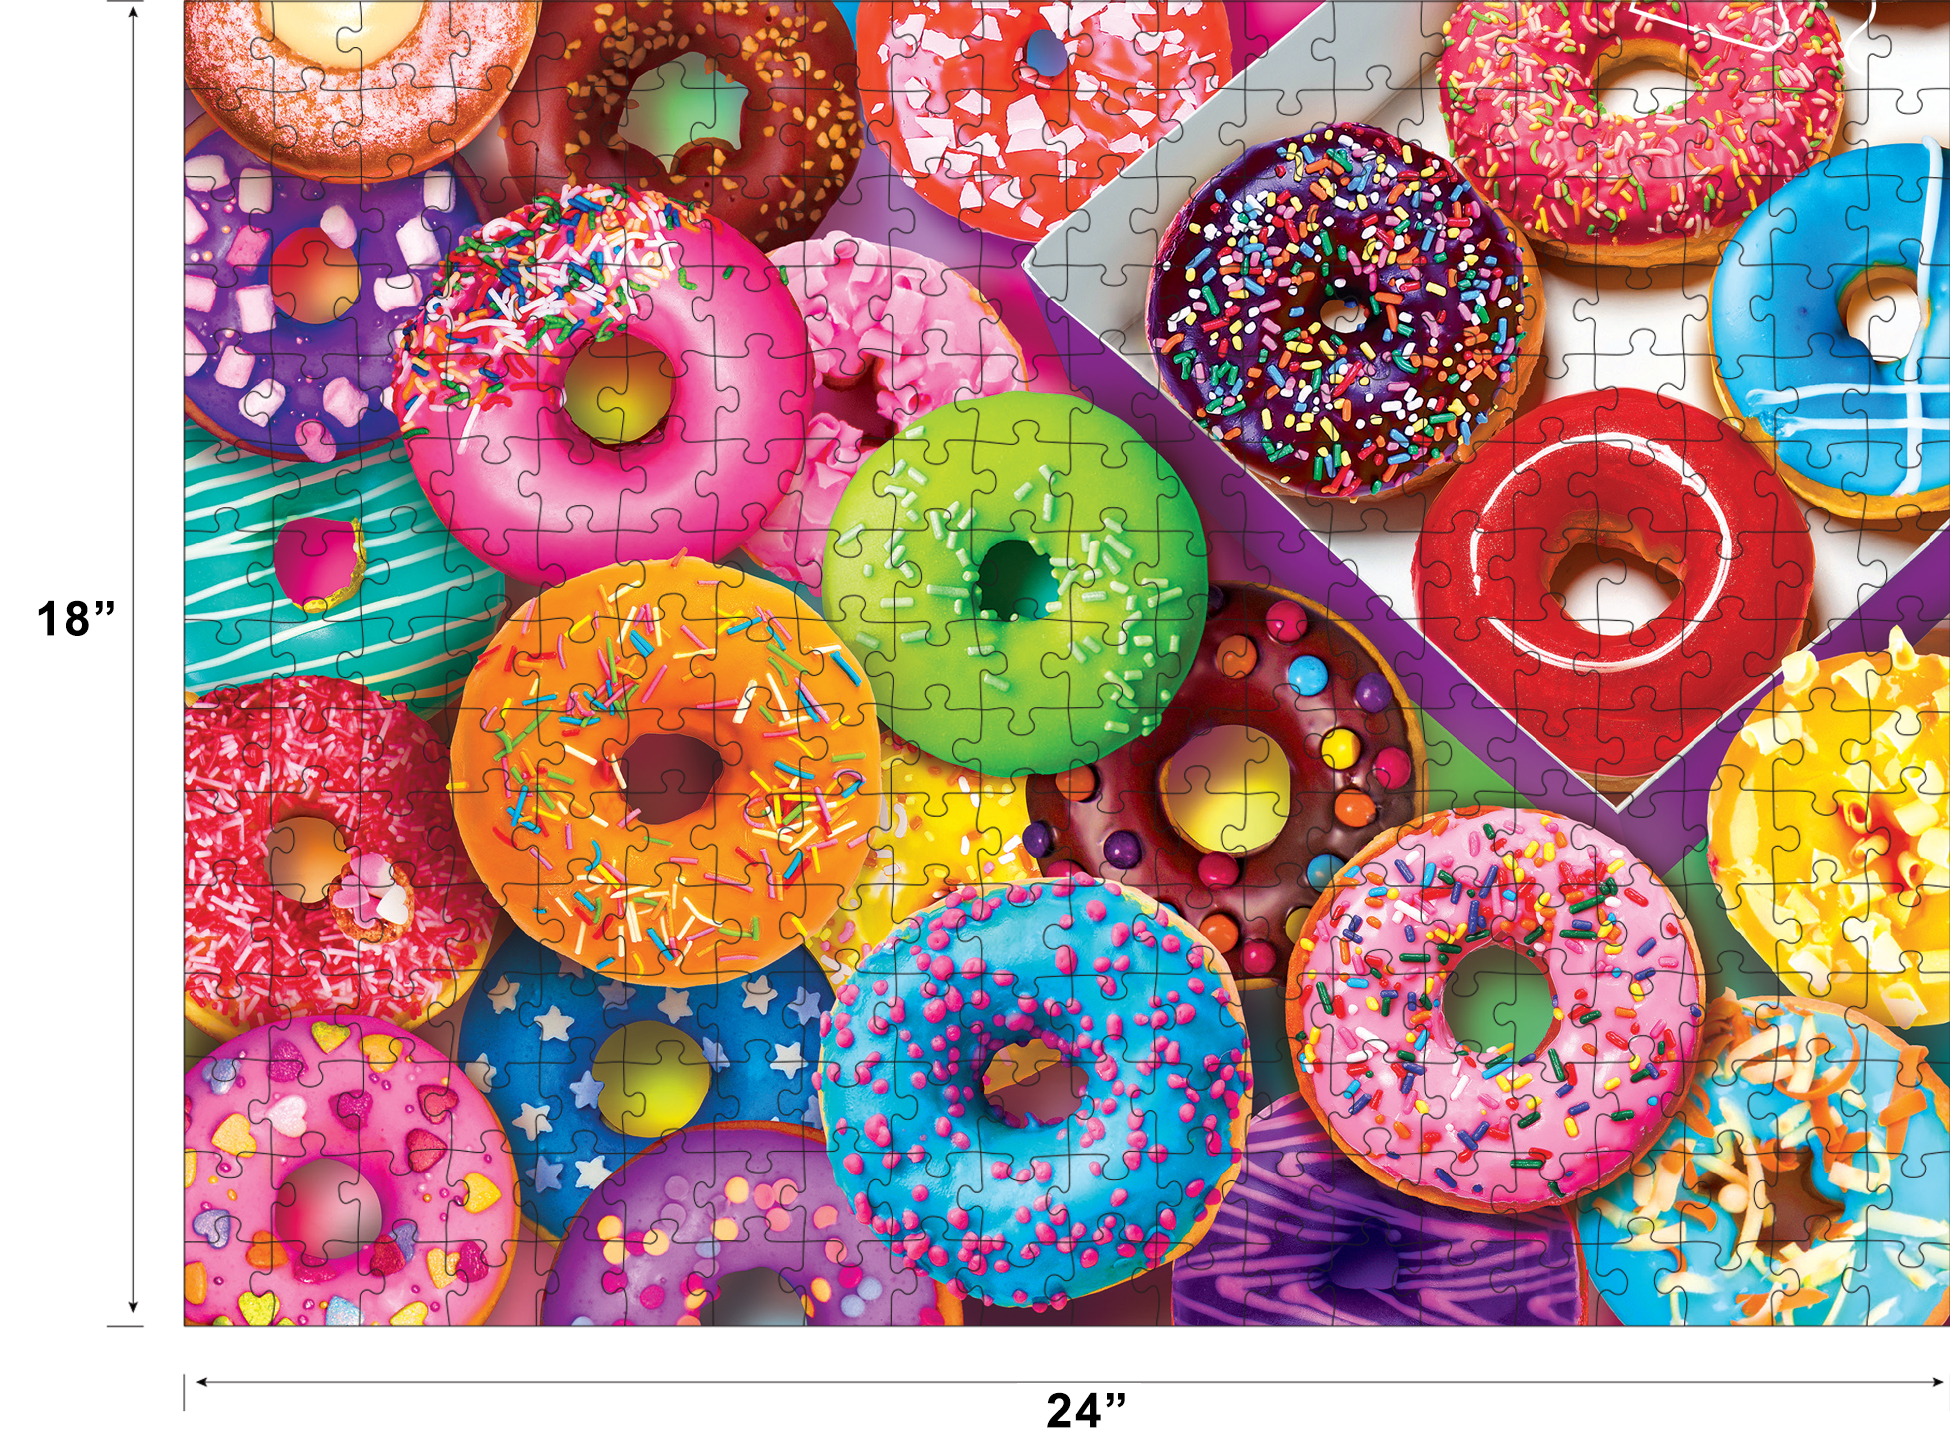 Cra-Z-Art Yummy Puzzles 300-Piece I Love Donuts Jigsaw Puzzle - image 5 of 6